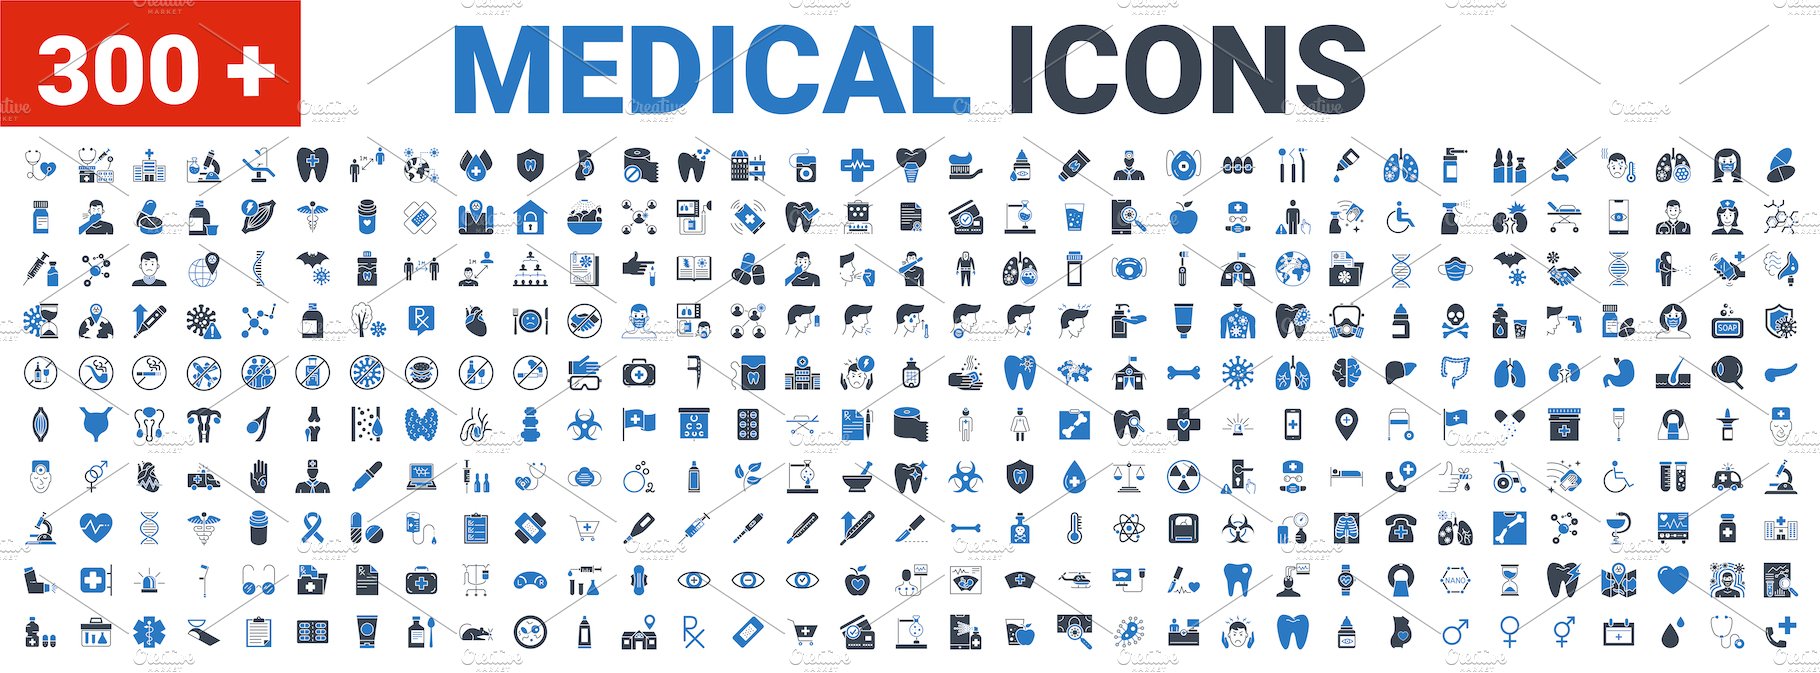 Medical Vector Icons Set cover image.